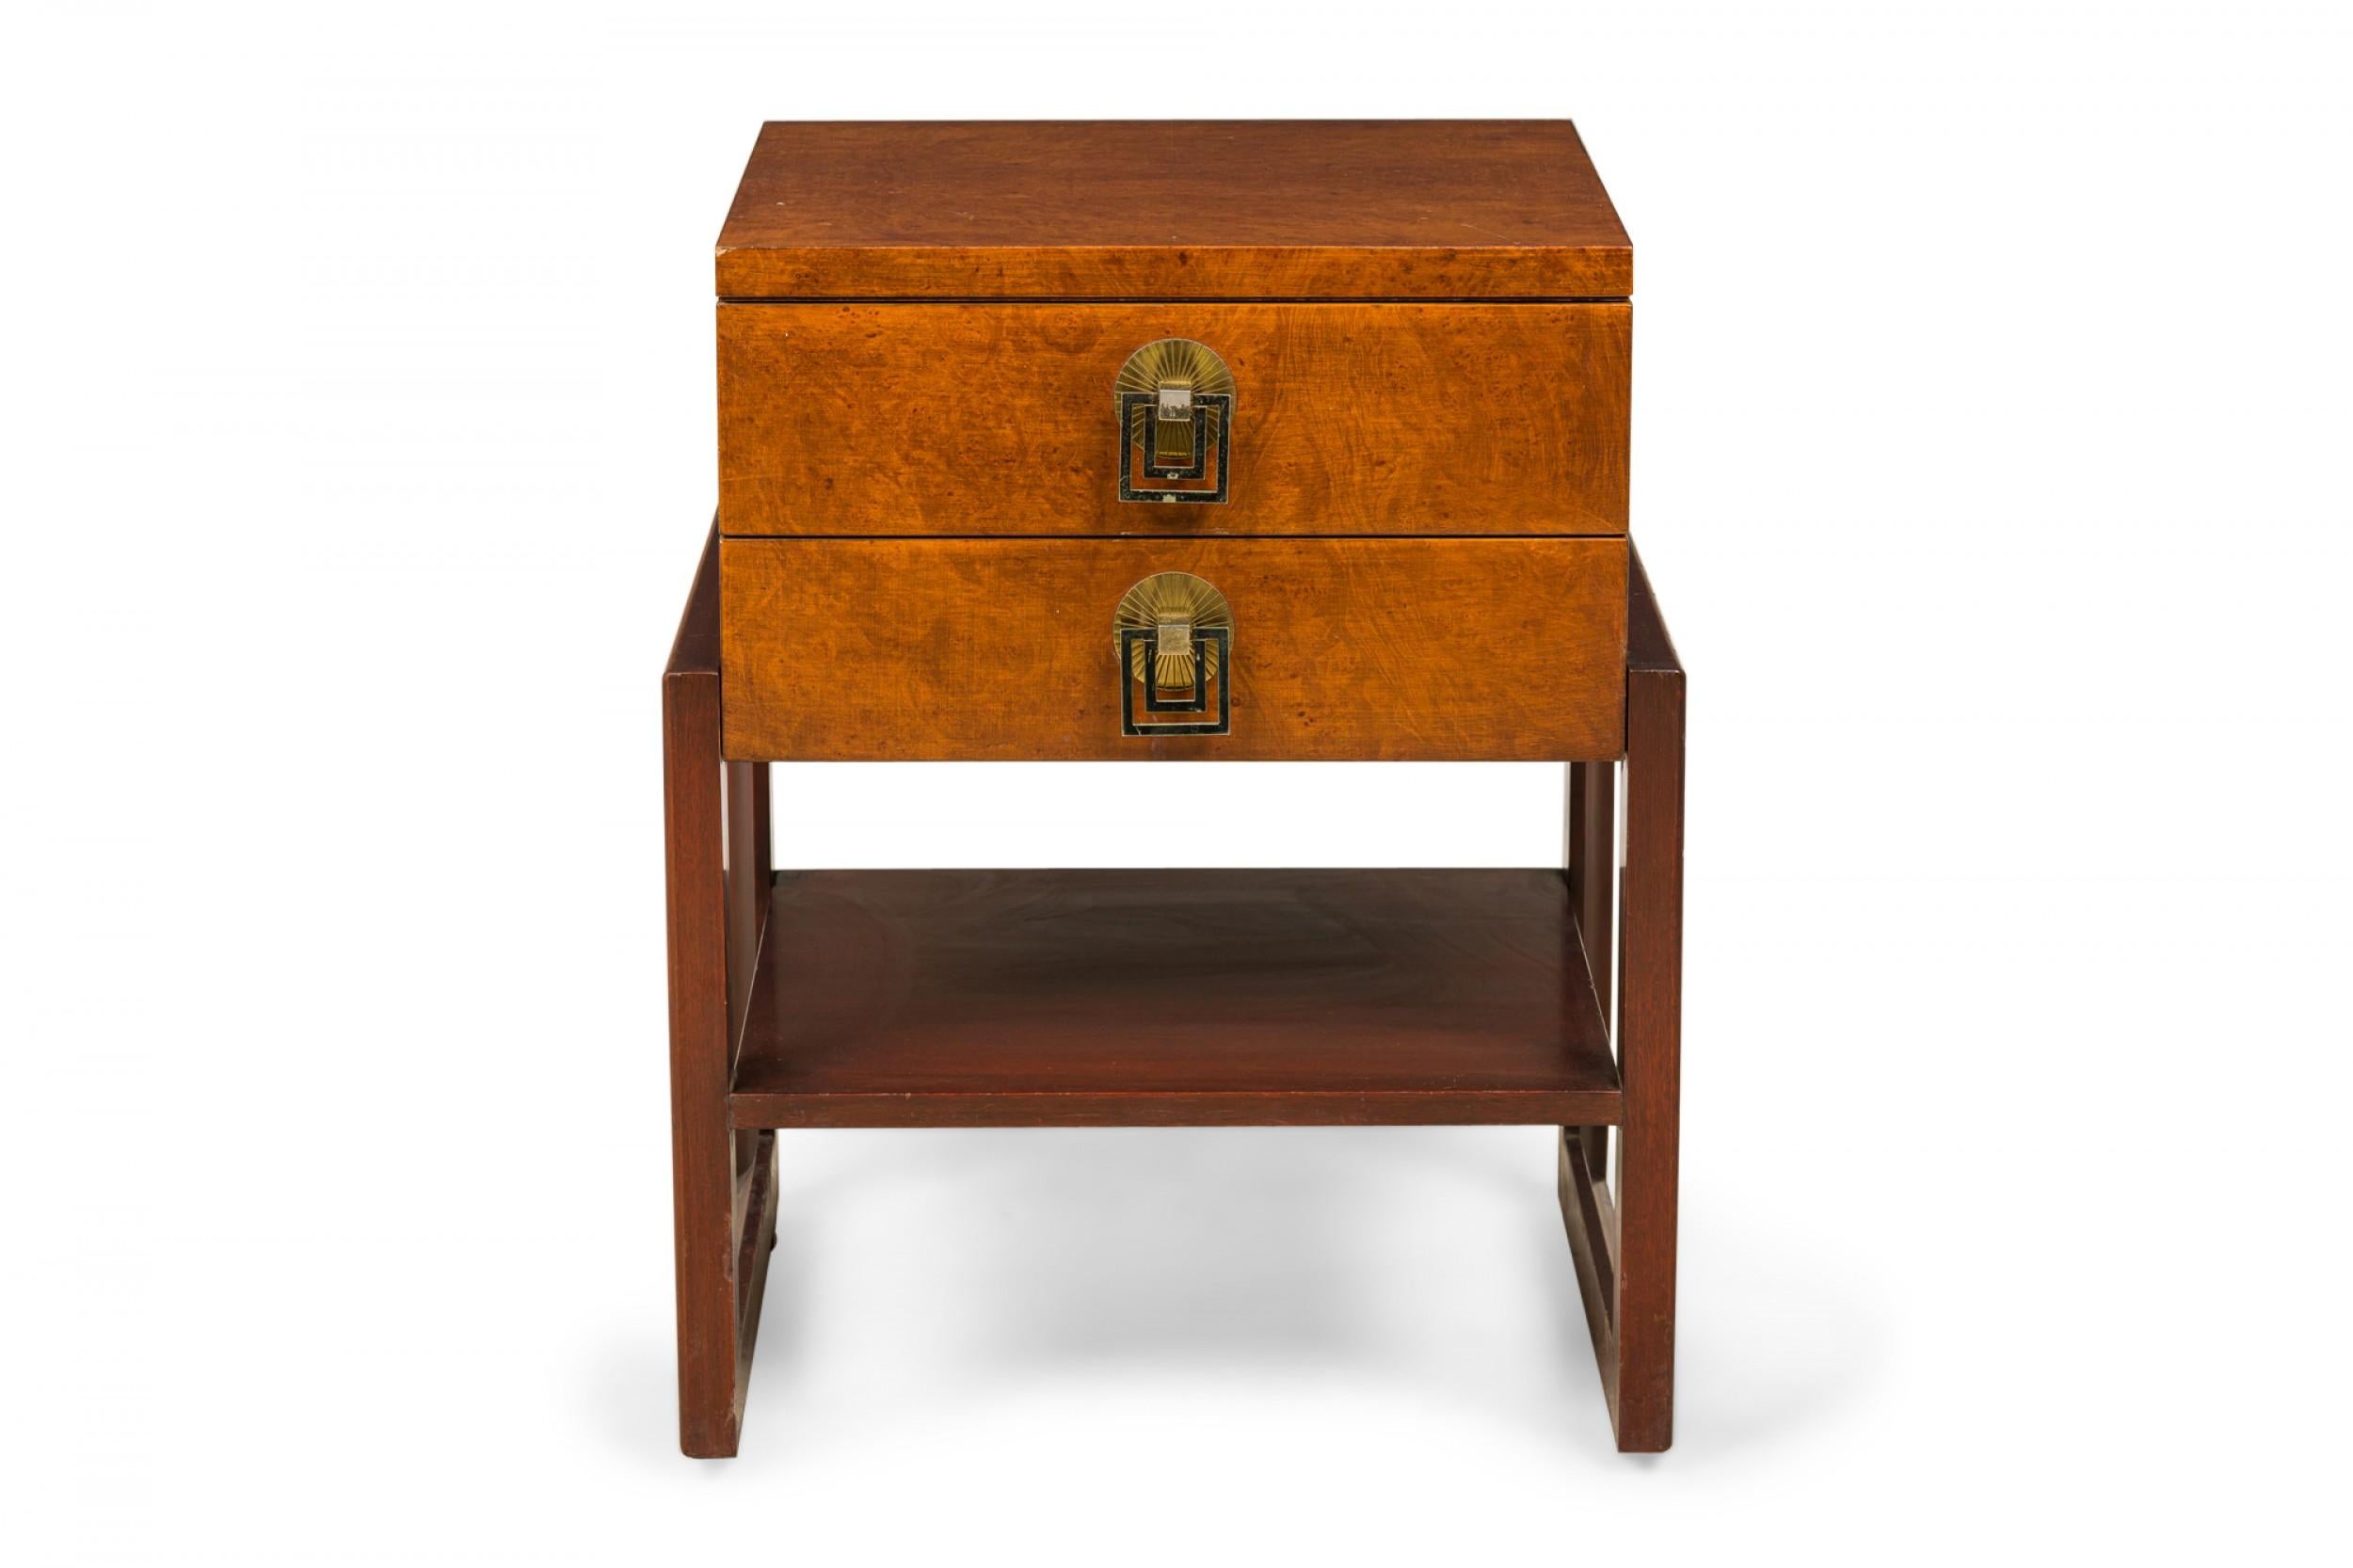 American mid-century nightstand / bedside table comprised of an upper two-drawer chest with burl wood veneer and two polished brass drawer pulls, resting on an open square base with a lower shelf. (Renzo Rutili for Johnson Furniture Company).